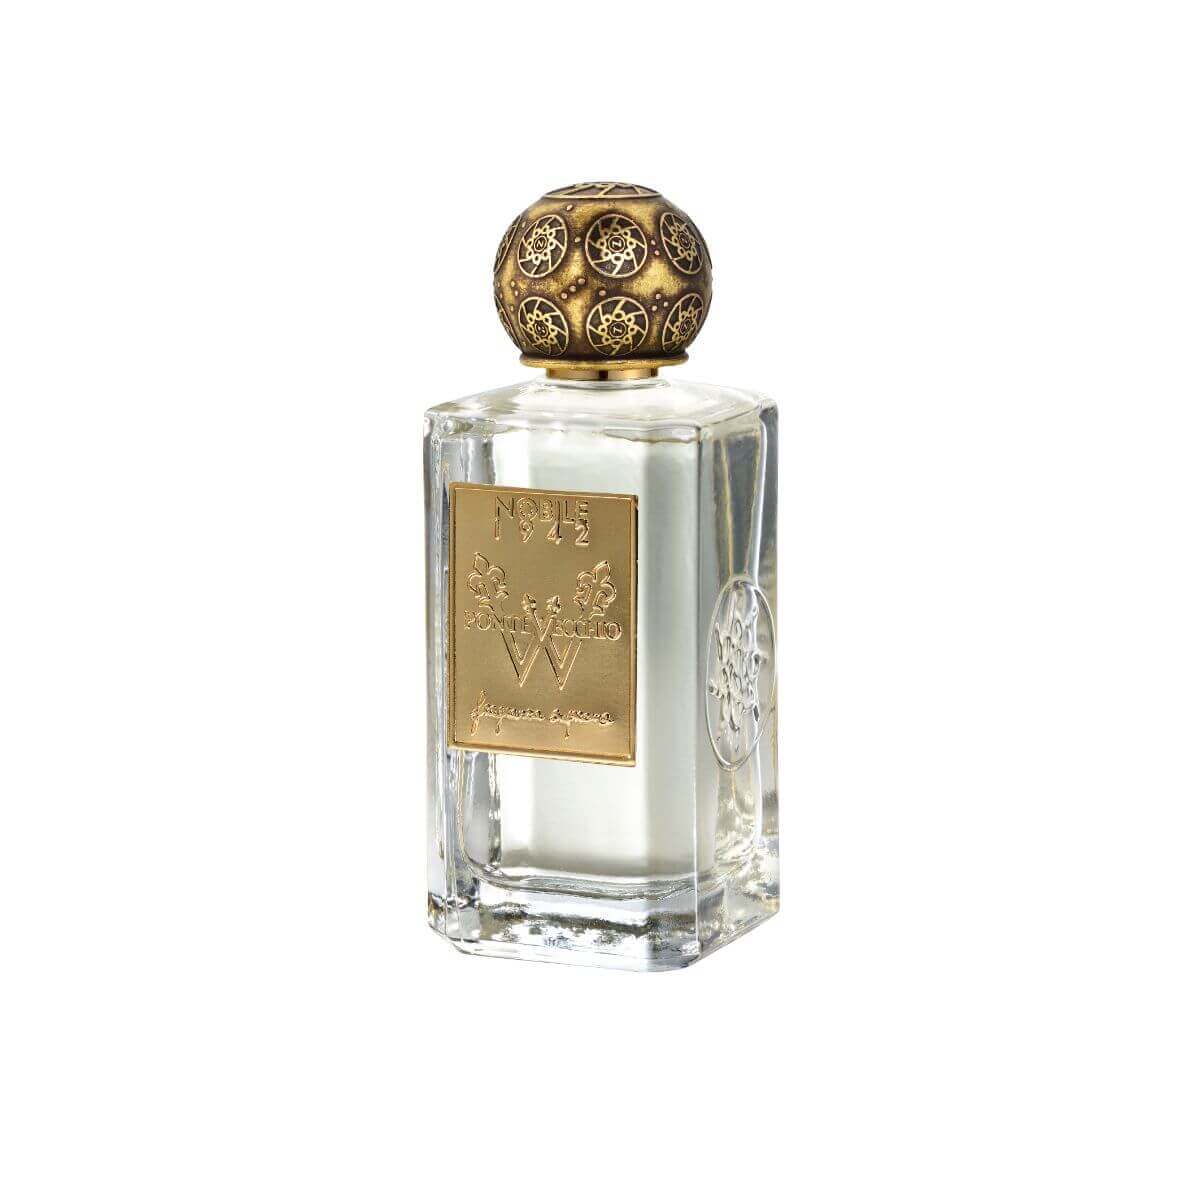 Nobile 1942 – Pontevicchio W, A Powerful Yet Gentle Fragrance For Hera Magnificent Scent With Its Sweet Tones Of Iris, Bulgarian Rose And Indian Jasminethe Magical Tones Blend Together To Create A Carousel Of Emotionsan Aroma That Suits Strong, Sensitive And Refined WomenTop Note: BergamotHeart Note: IrisBase Note: Musk.